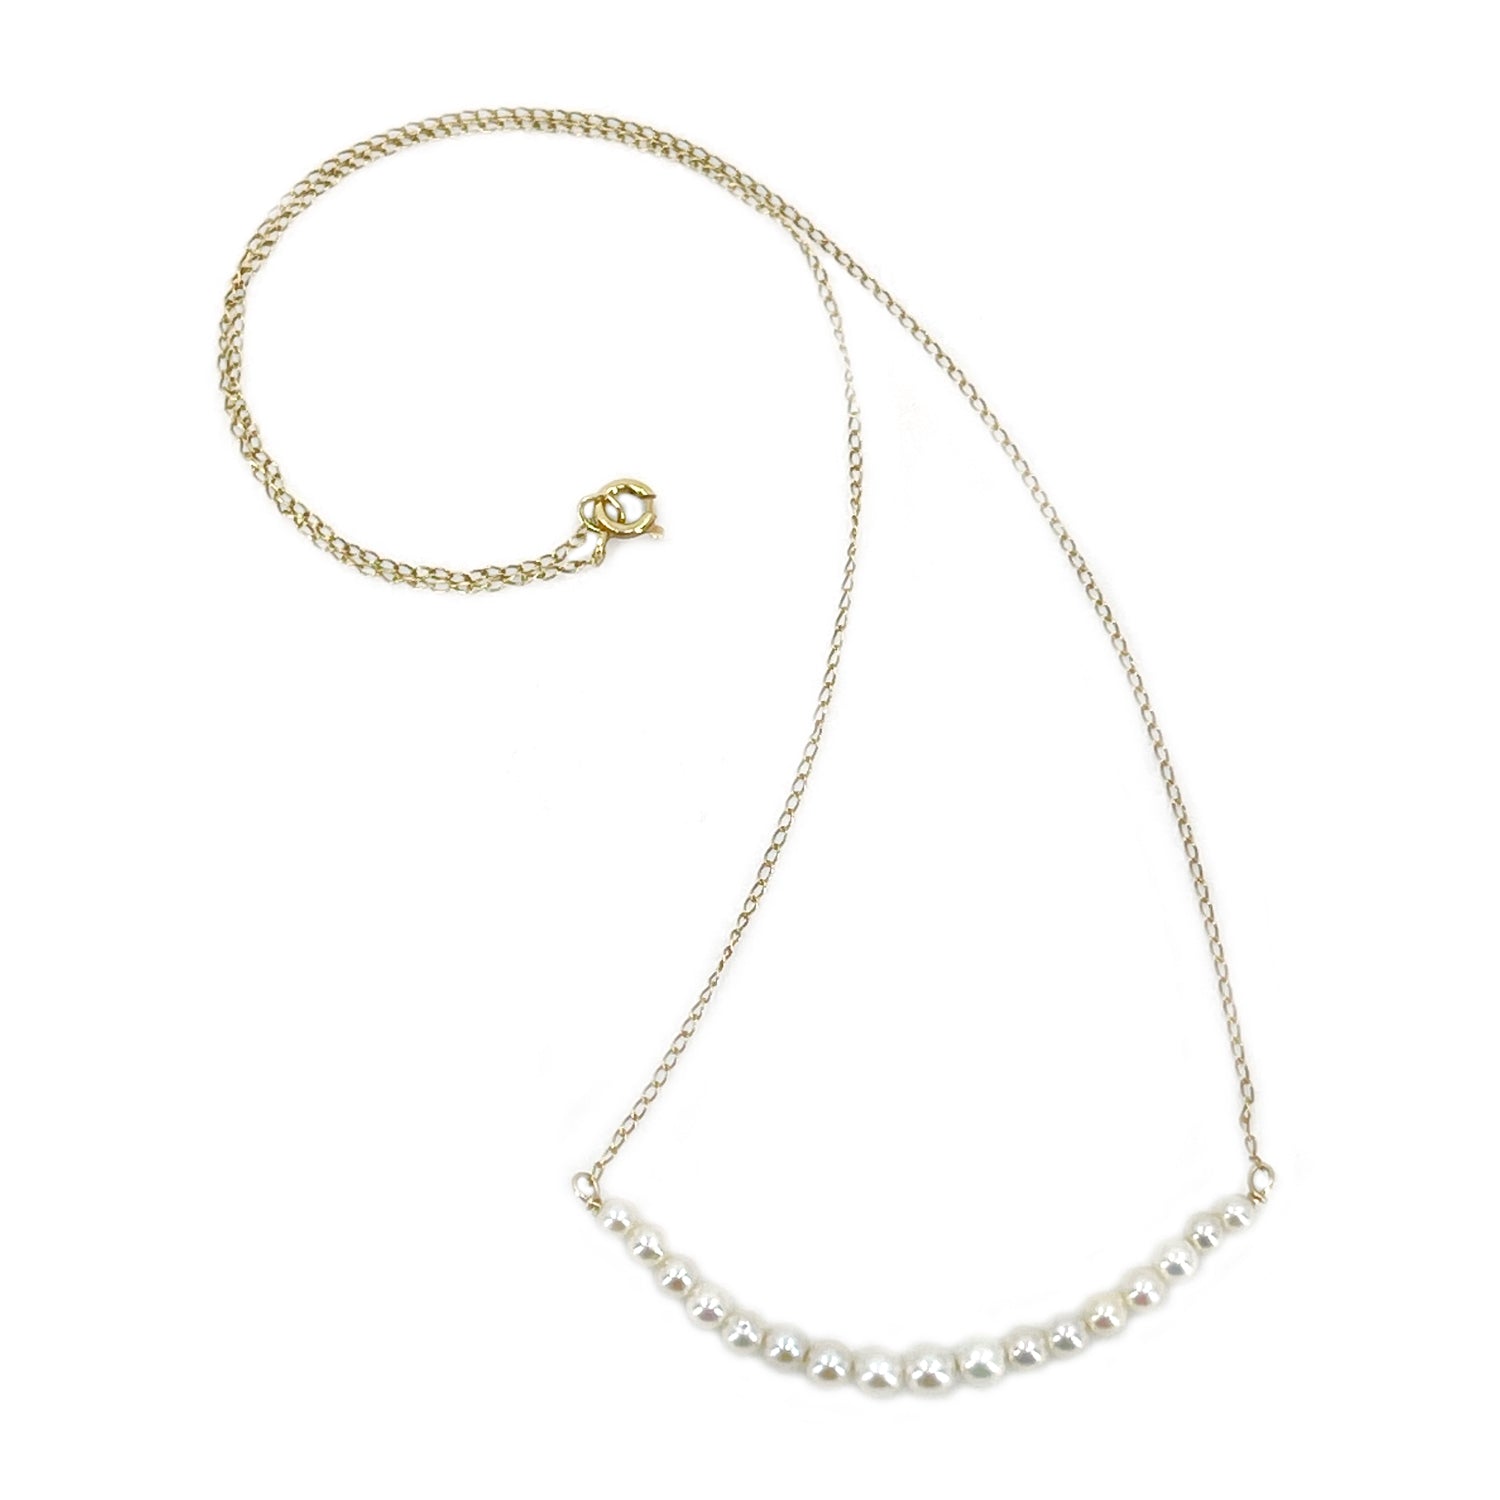 Deltah Vintage Graduated Akoya Saltwater Cultured Pearl Bar Chain Choker Necklace - 14K Yellow Gold 15.50 Inch